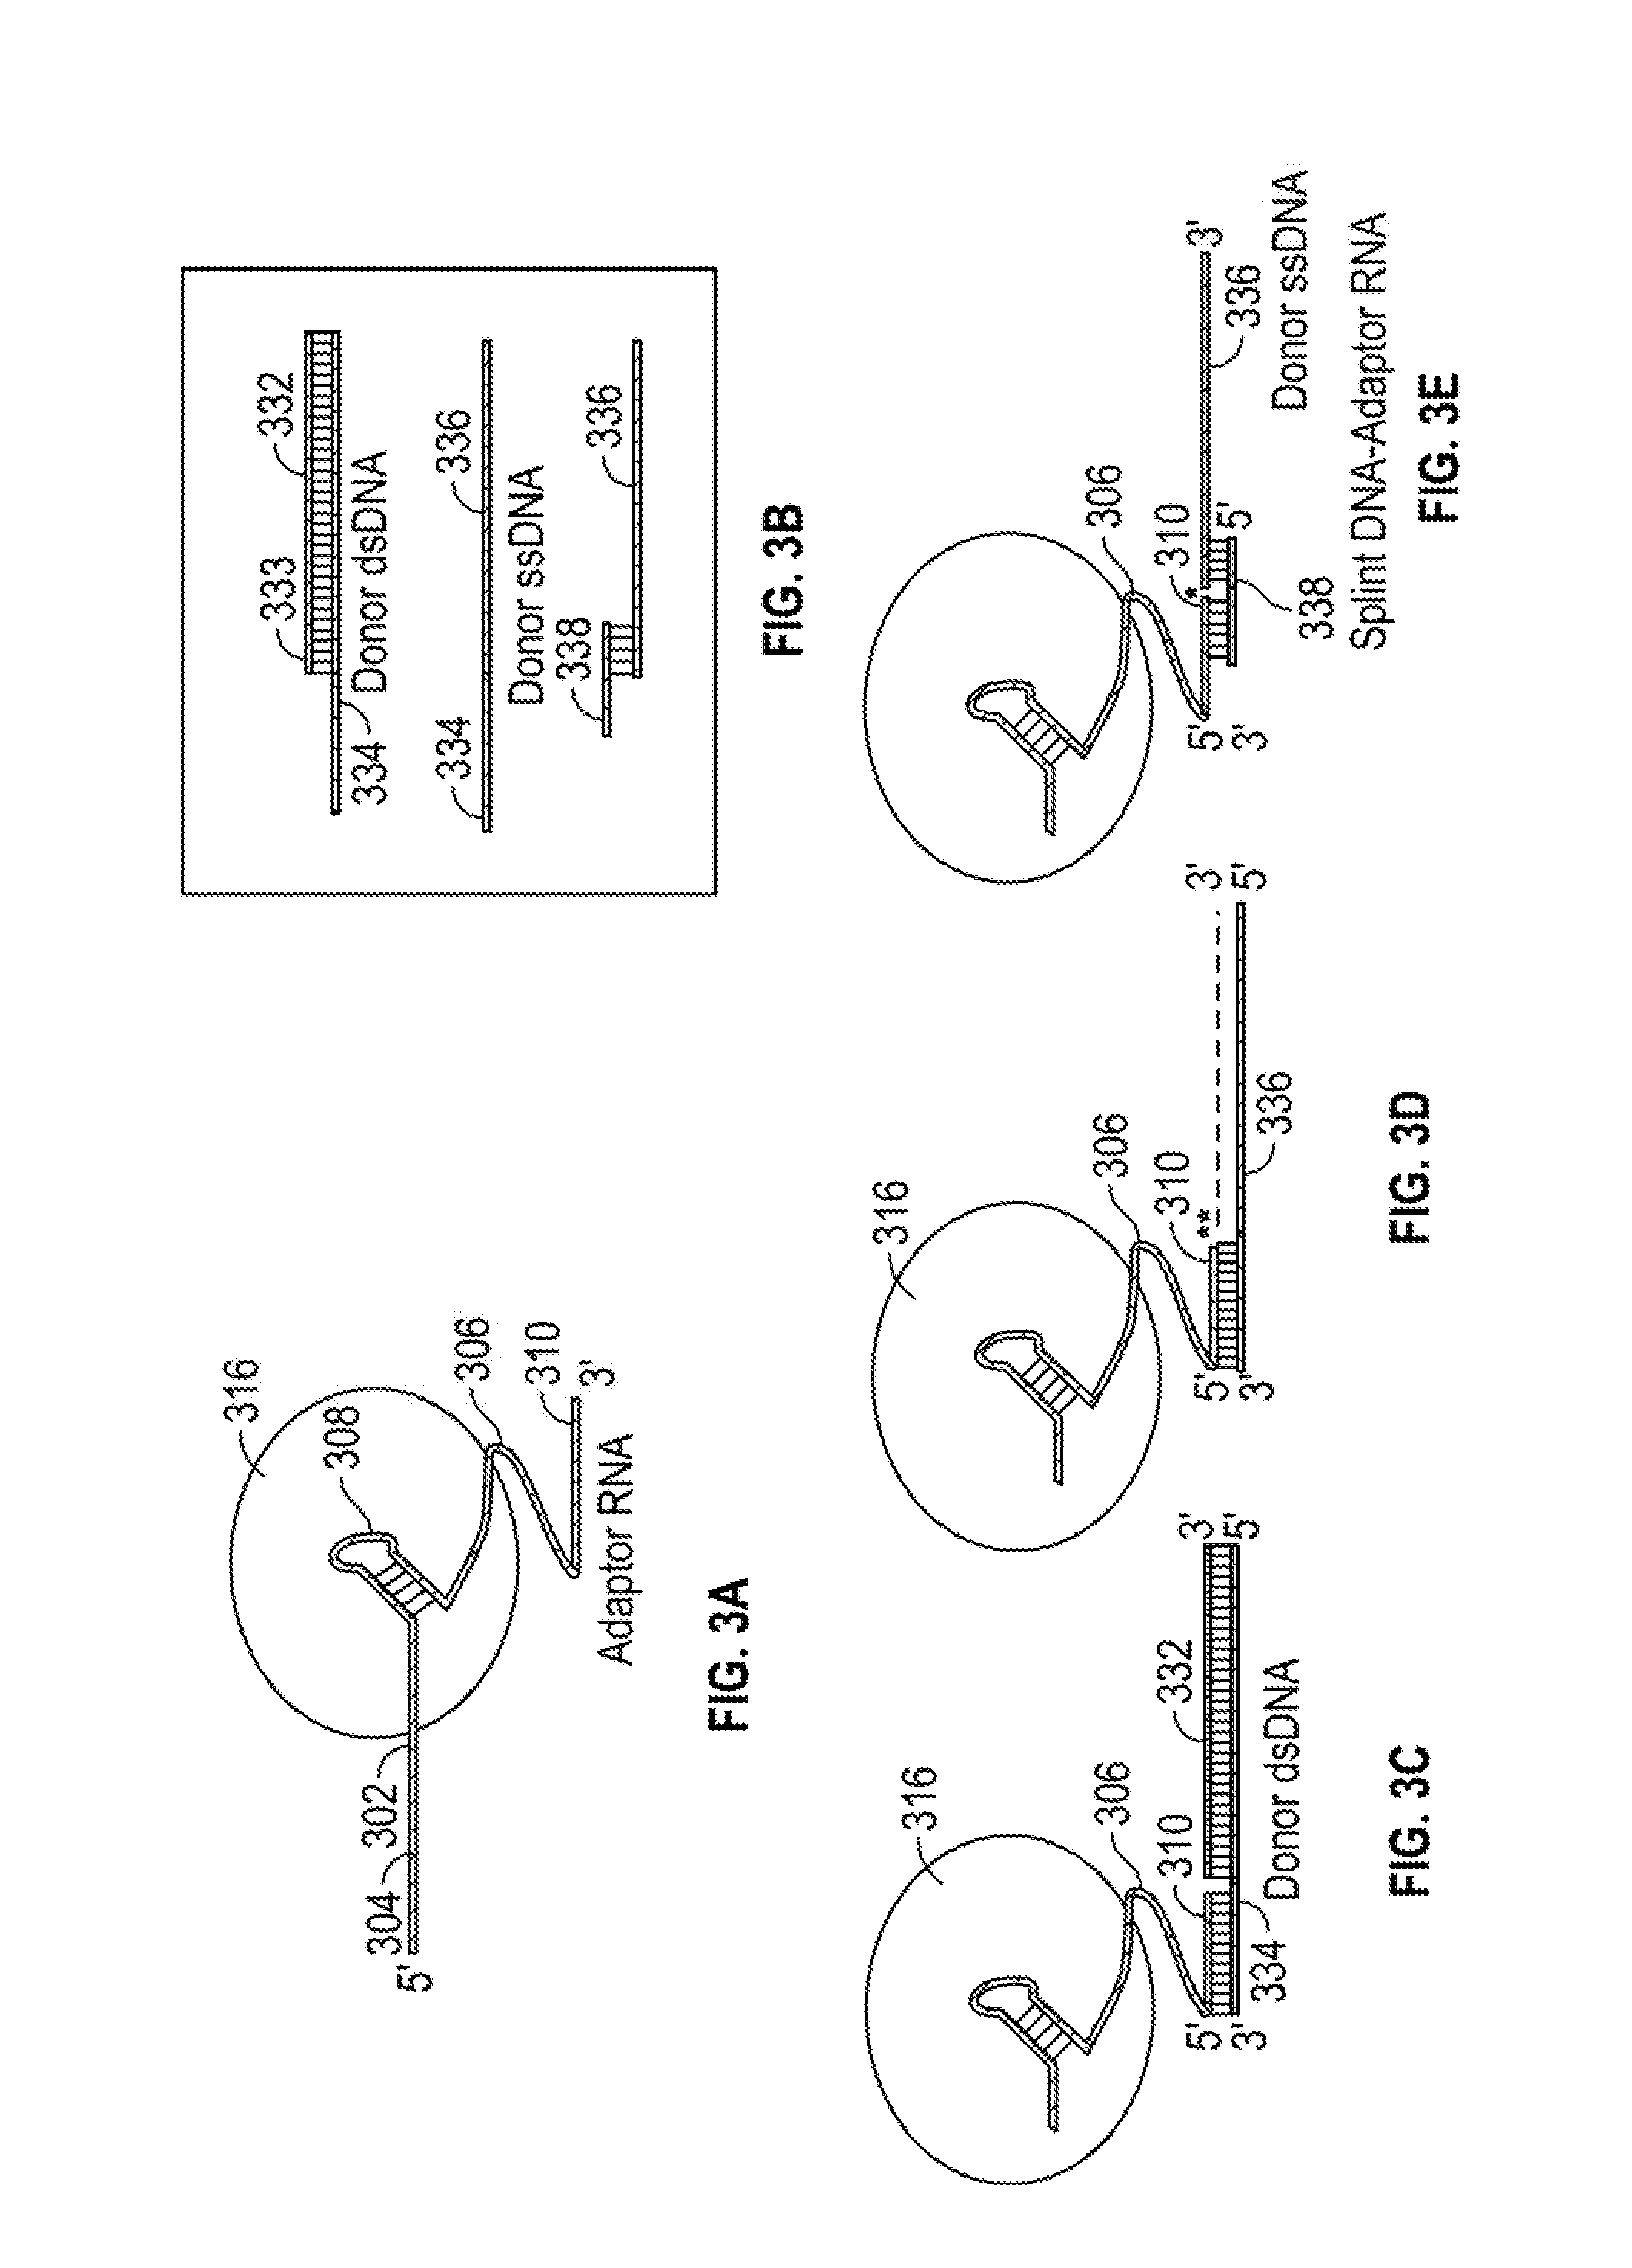 Compounds and methods for crispr/cas-based genome editing by homologous recombination